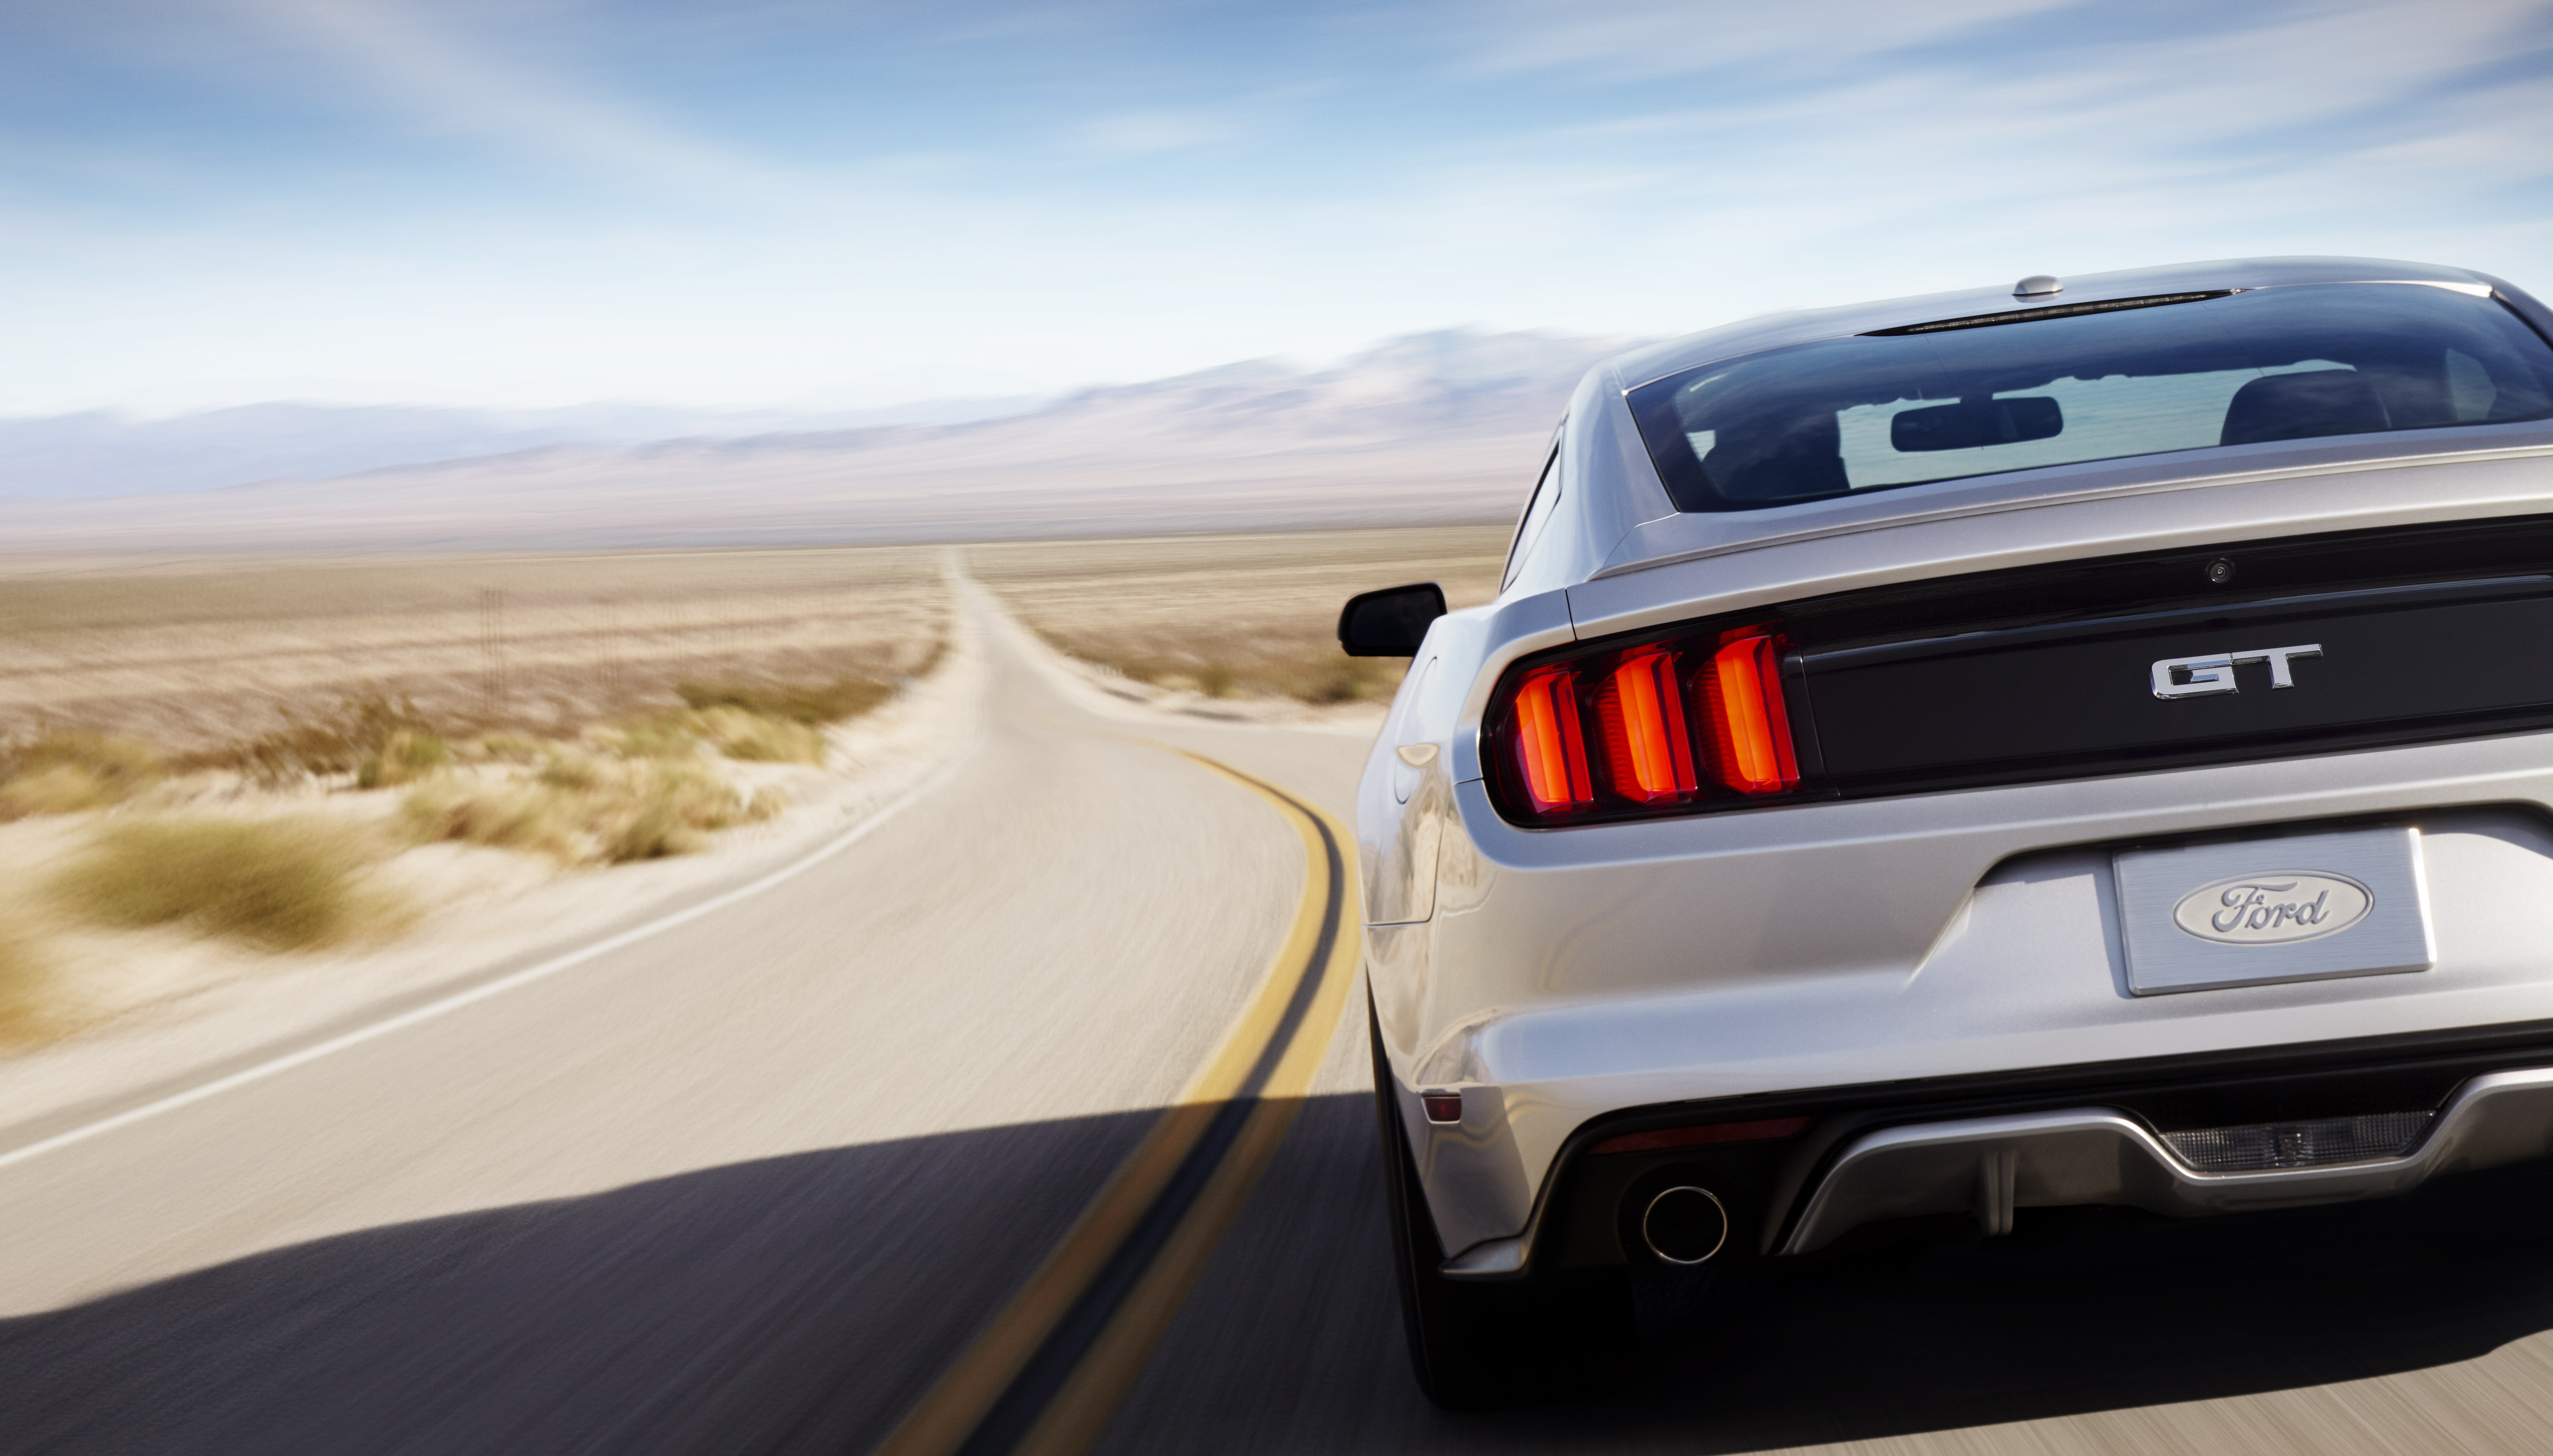 Ford Mustang Hd Wallpaper For Iphone